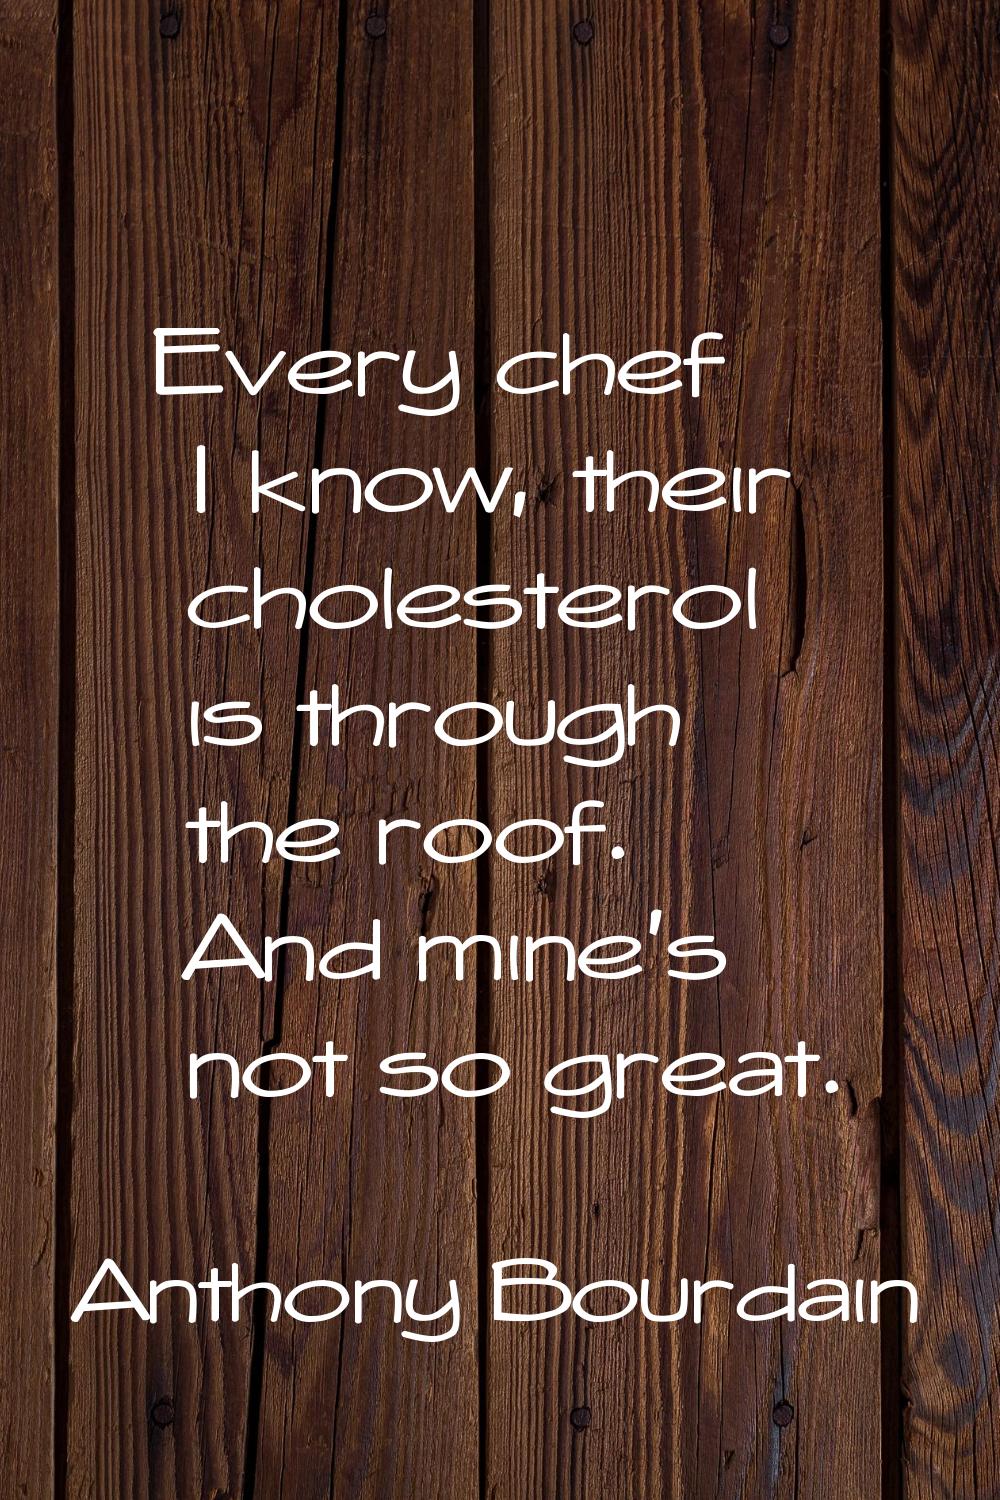 Every chef I know, their cholesterol is through the roof. And mine's not so great.